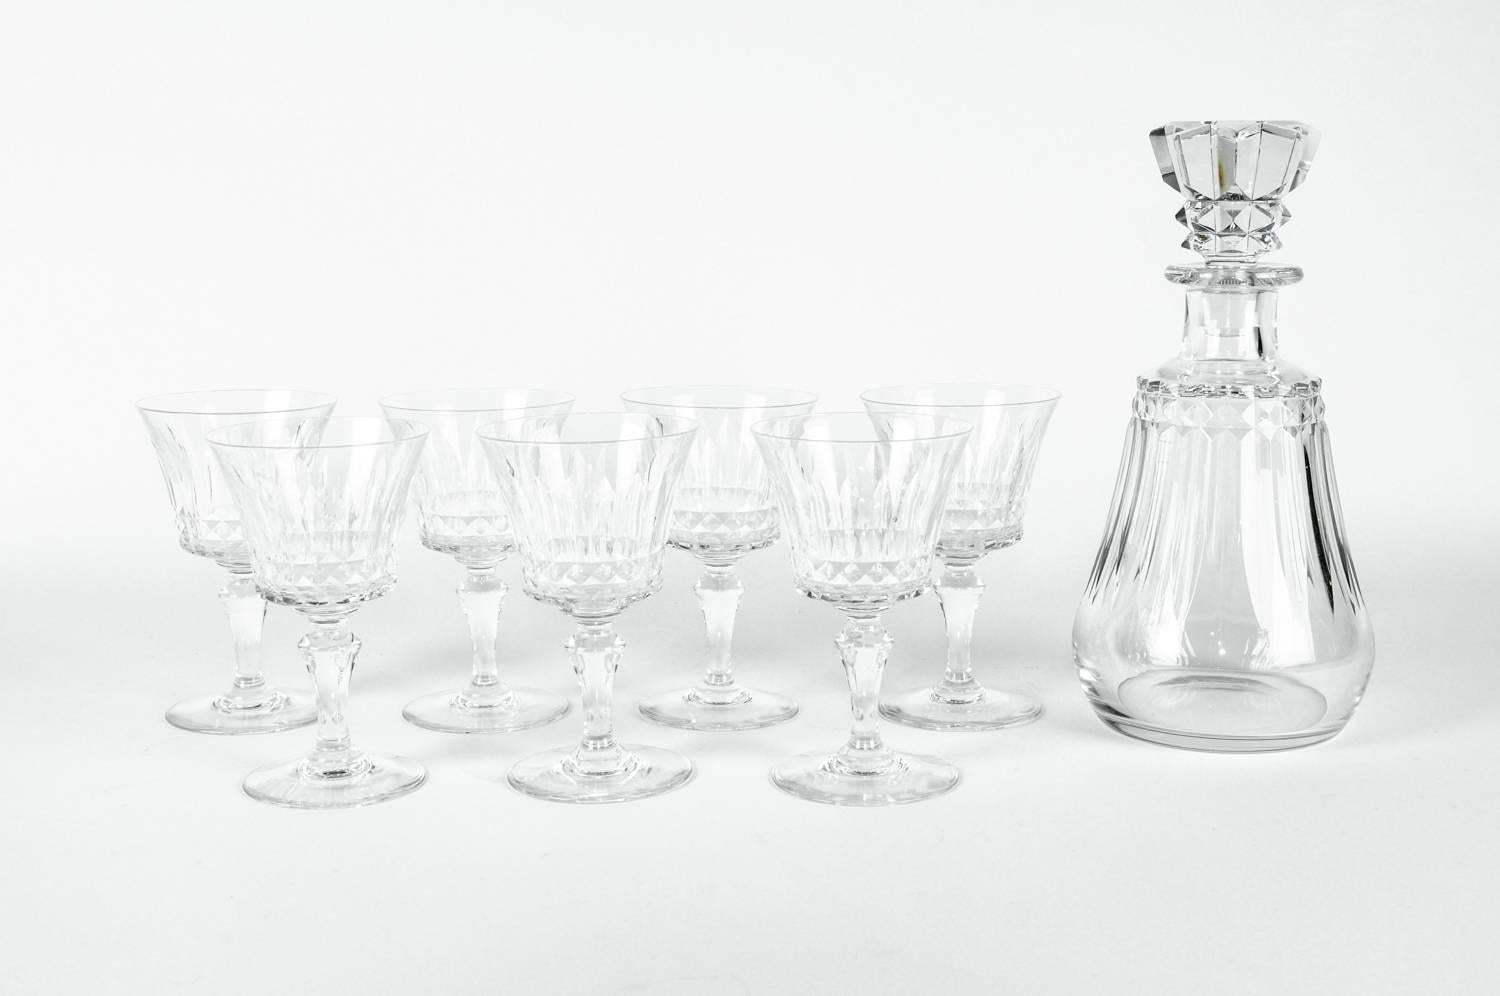 Vintage Baccarat crystal eight pieces decanter set. Each piece is in excellent condition , maker's mark undersigned in each piece. The decanter measure 10 inches high X 5 inches diameter. Each glass measure 5.5 inches high X 3.5 inches diameter.